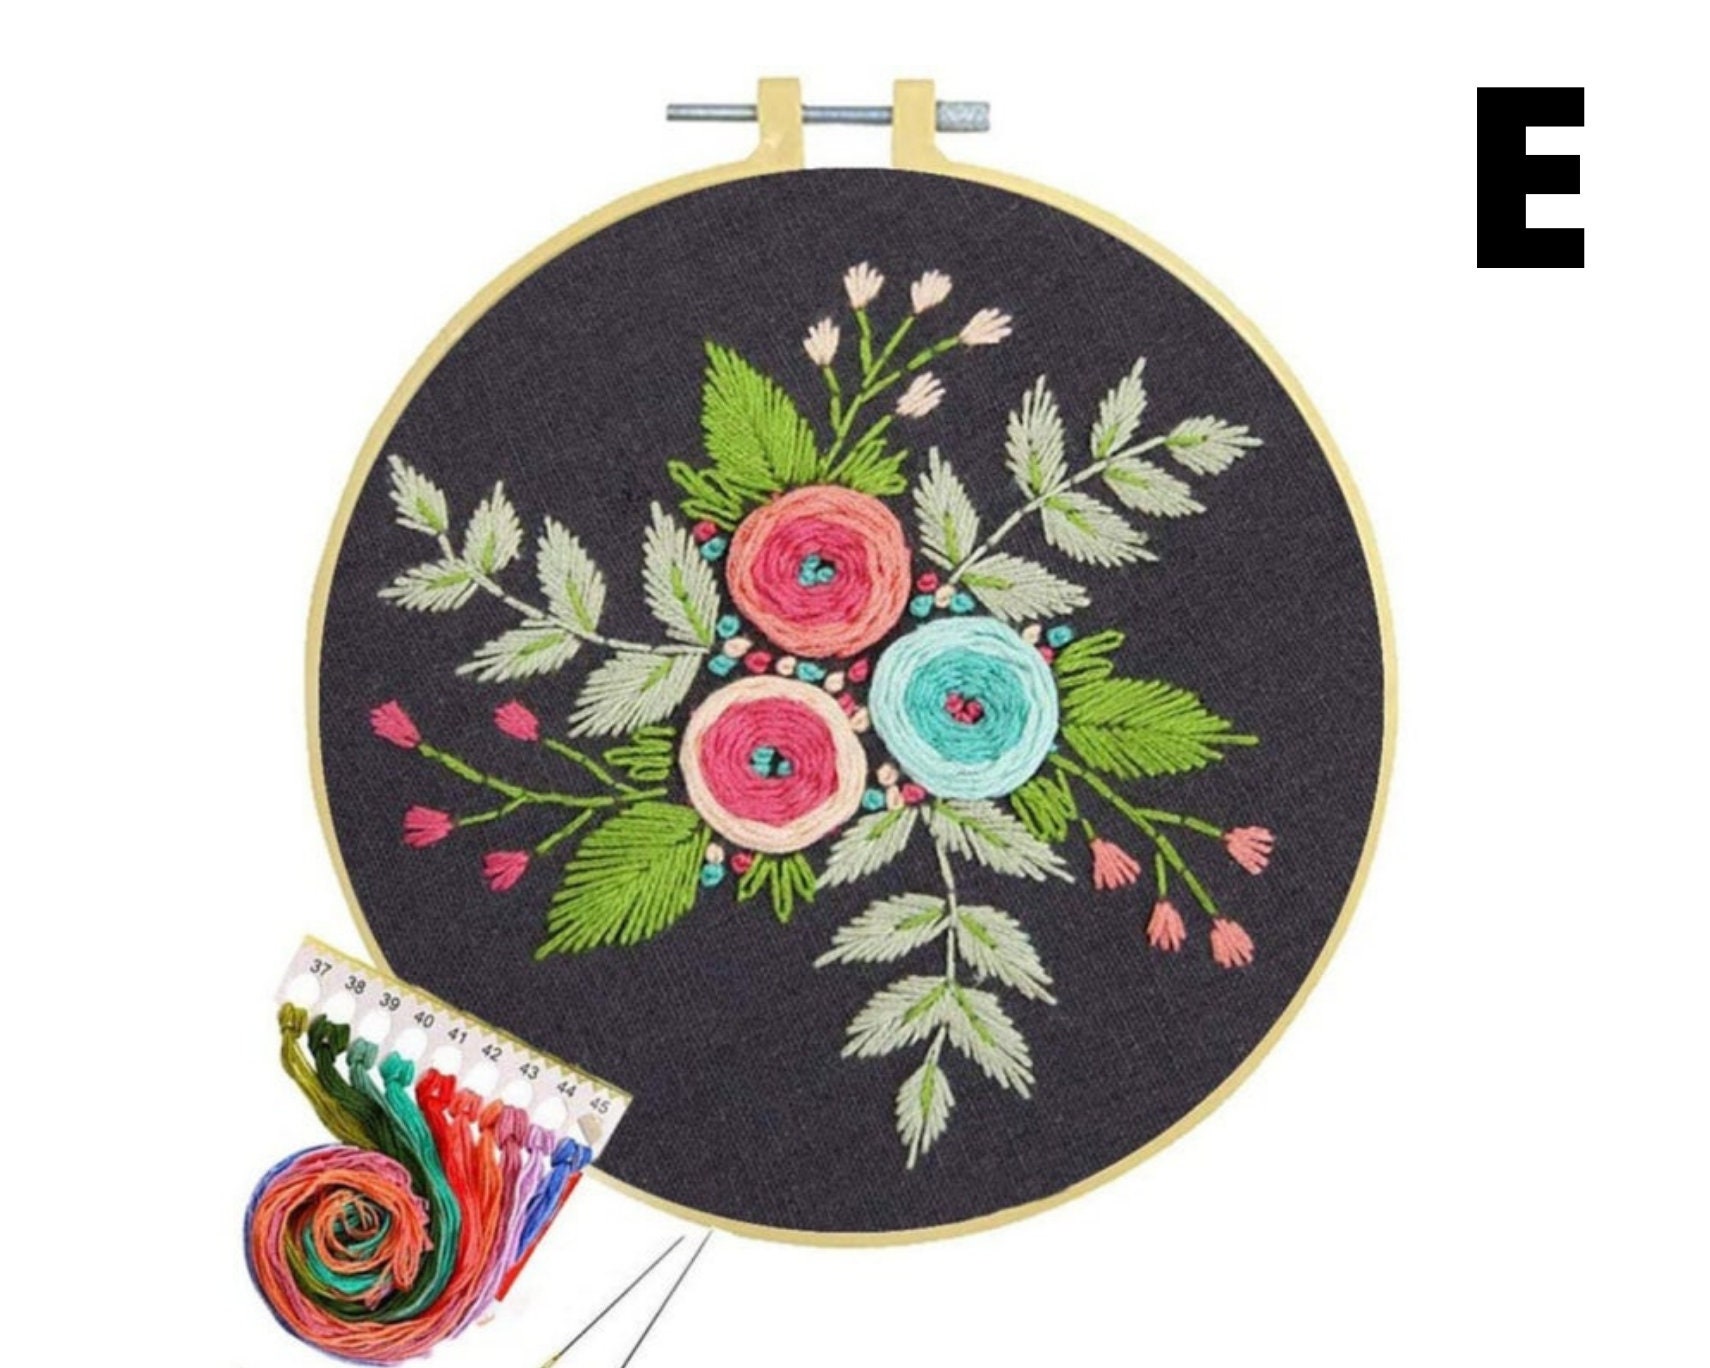 New Design Beginner Embroidery Full Kit With Hoop Wall Decor DIY Craft Kit  Stay at Home Handmade Embroidery Flowers Kids Crafts 